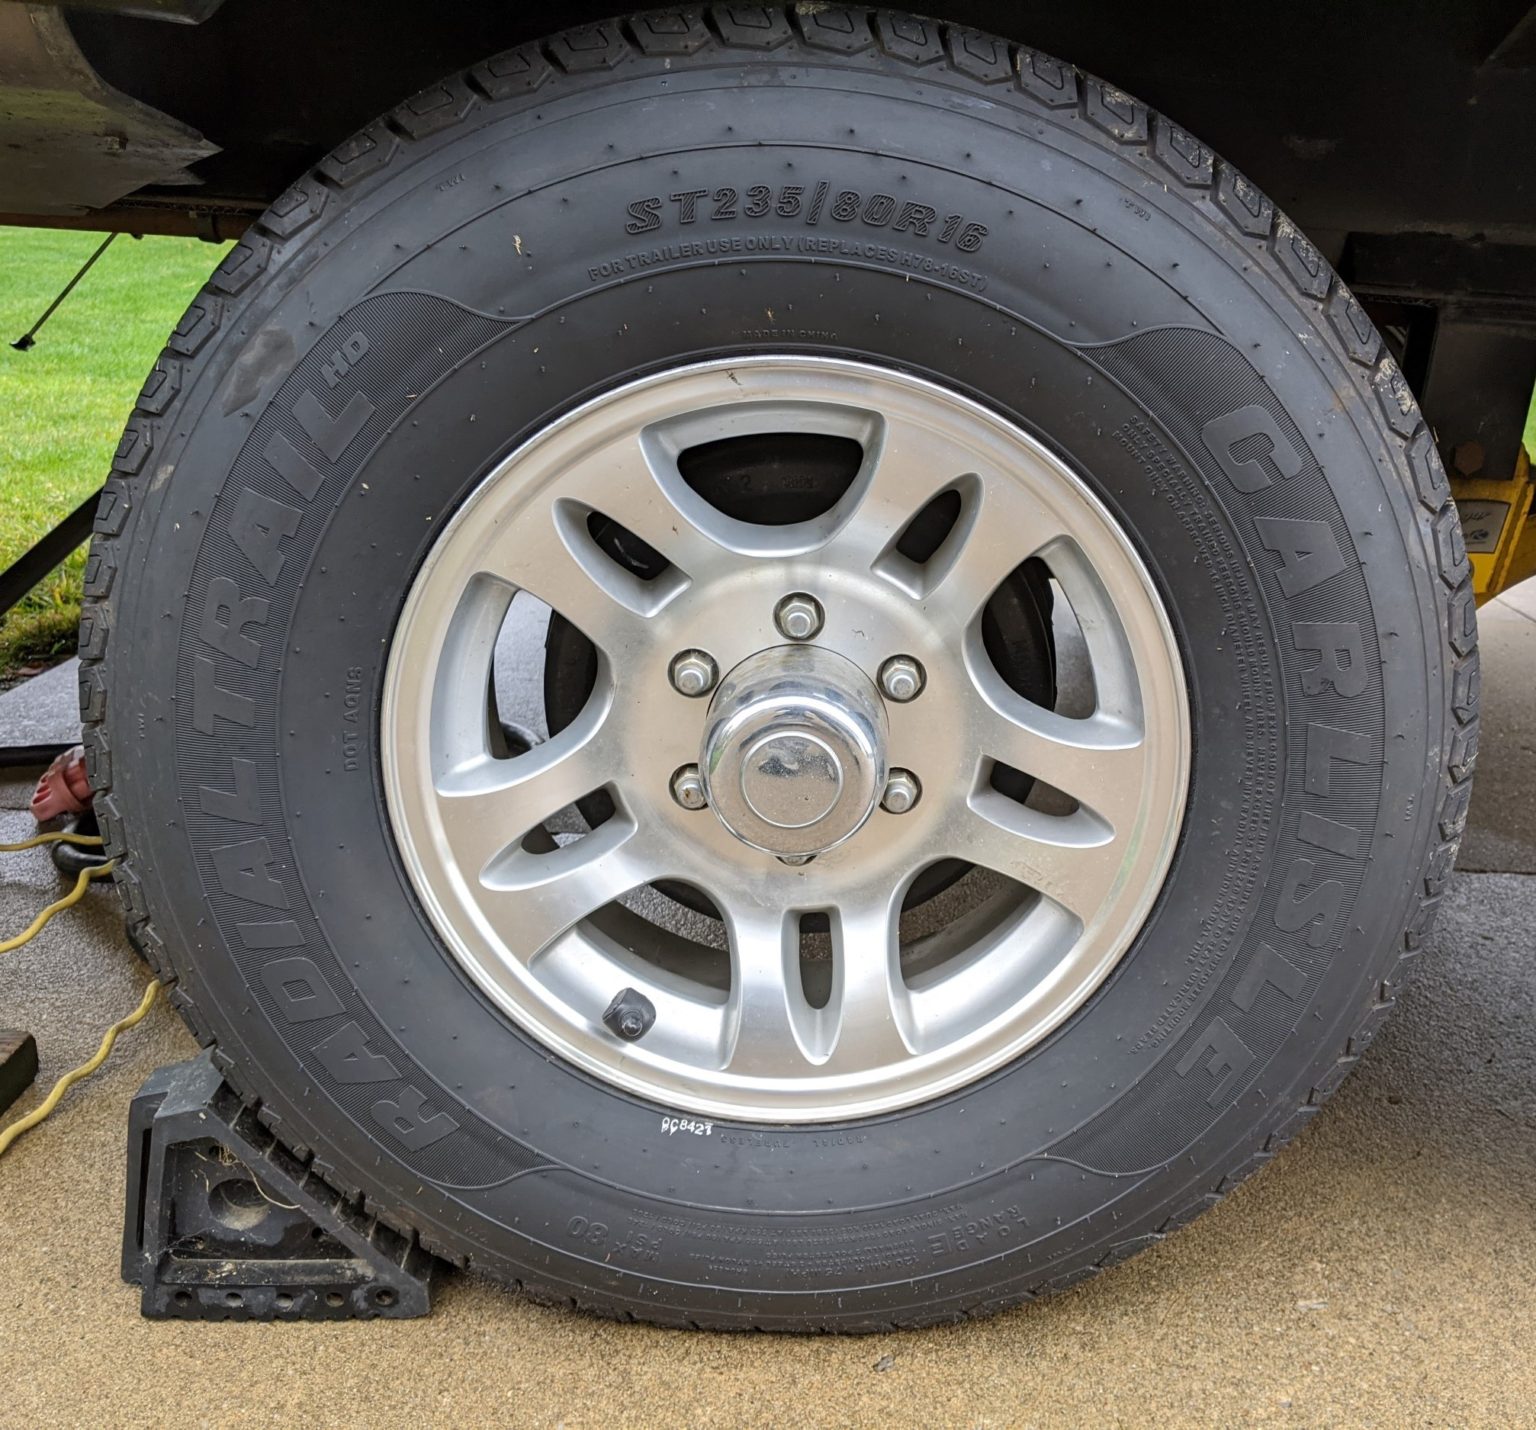 Setting the Correct RV Tire Pressure How to do it